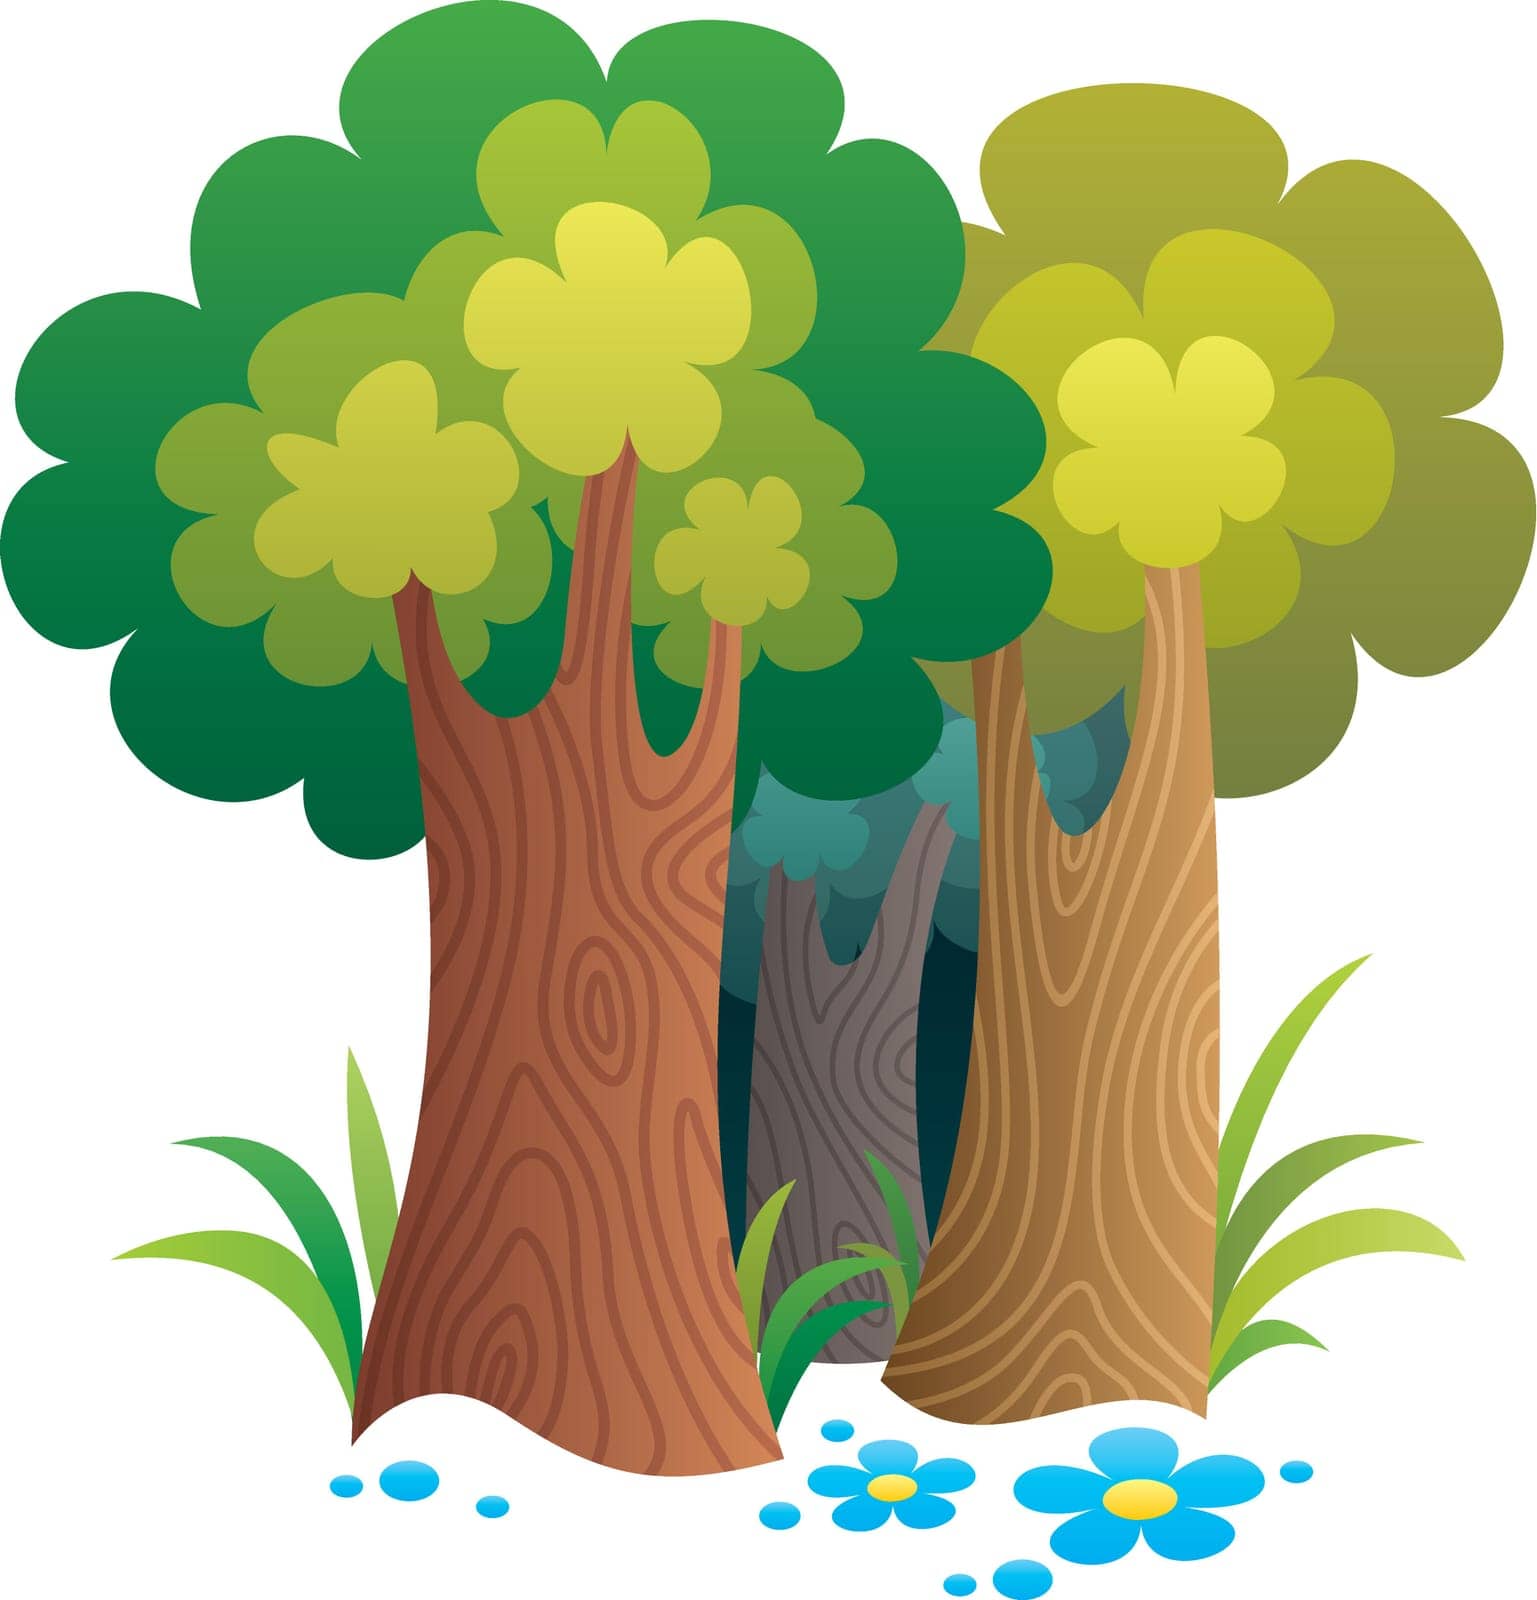 Cartoon forest. No transparency used. Basic (linear) gradients.